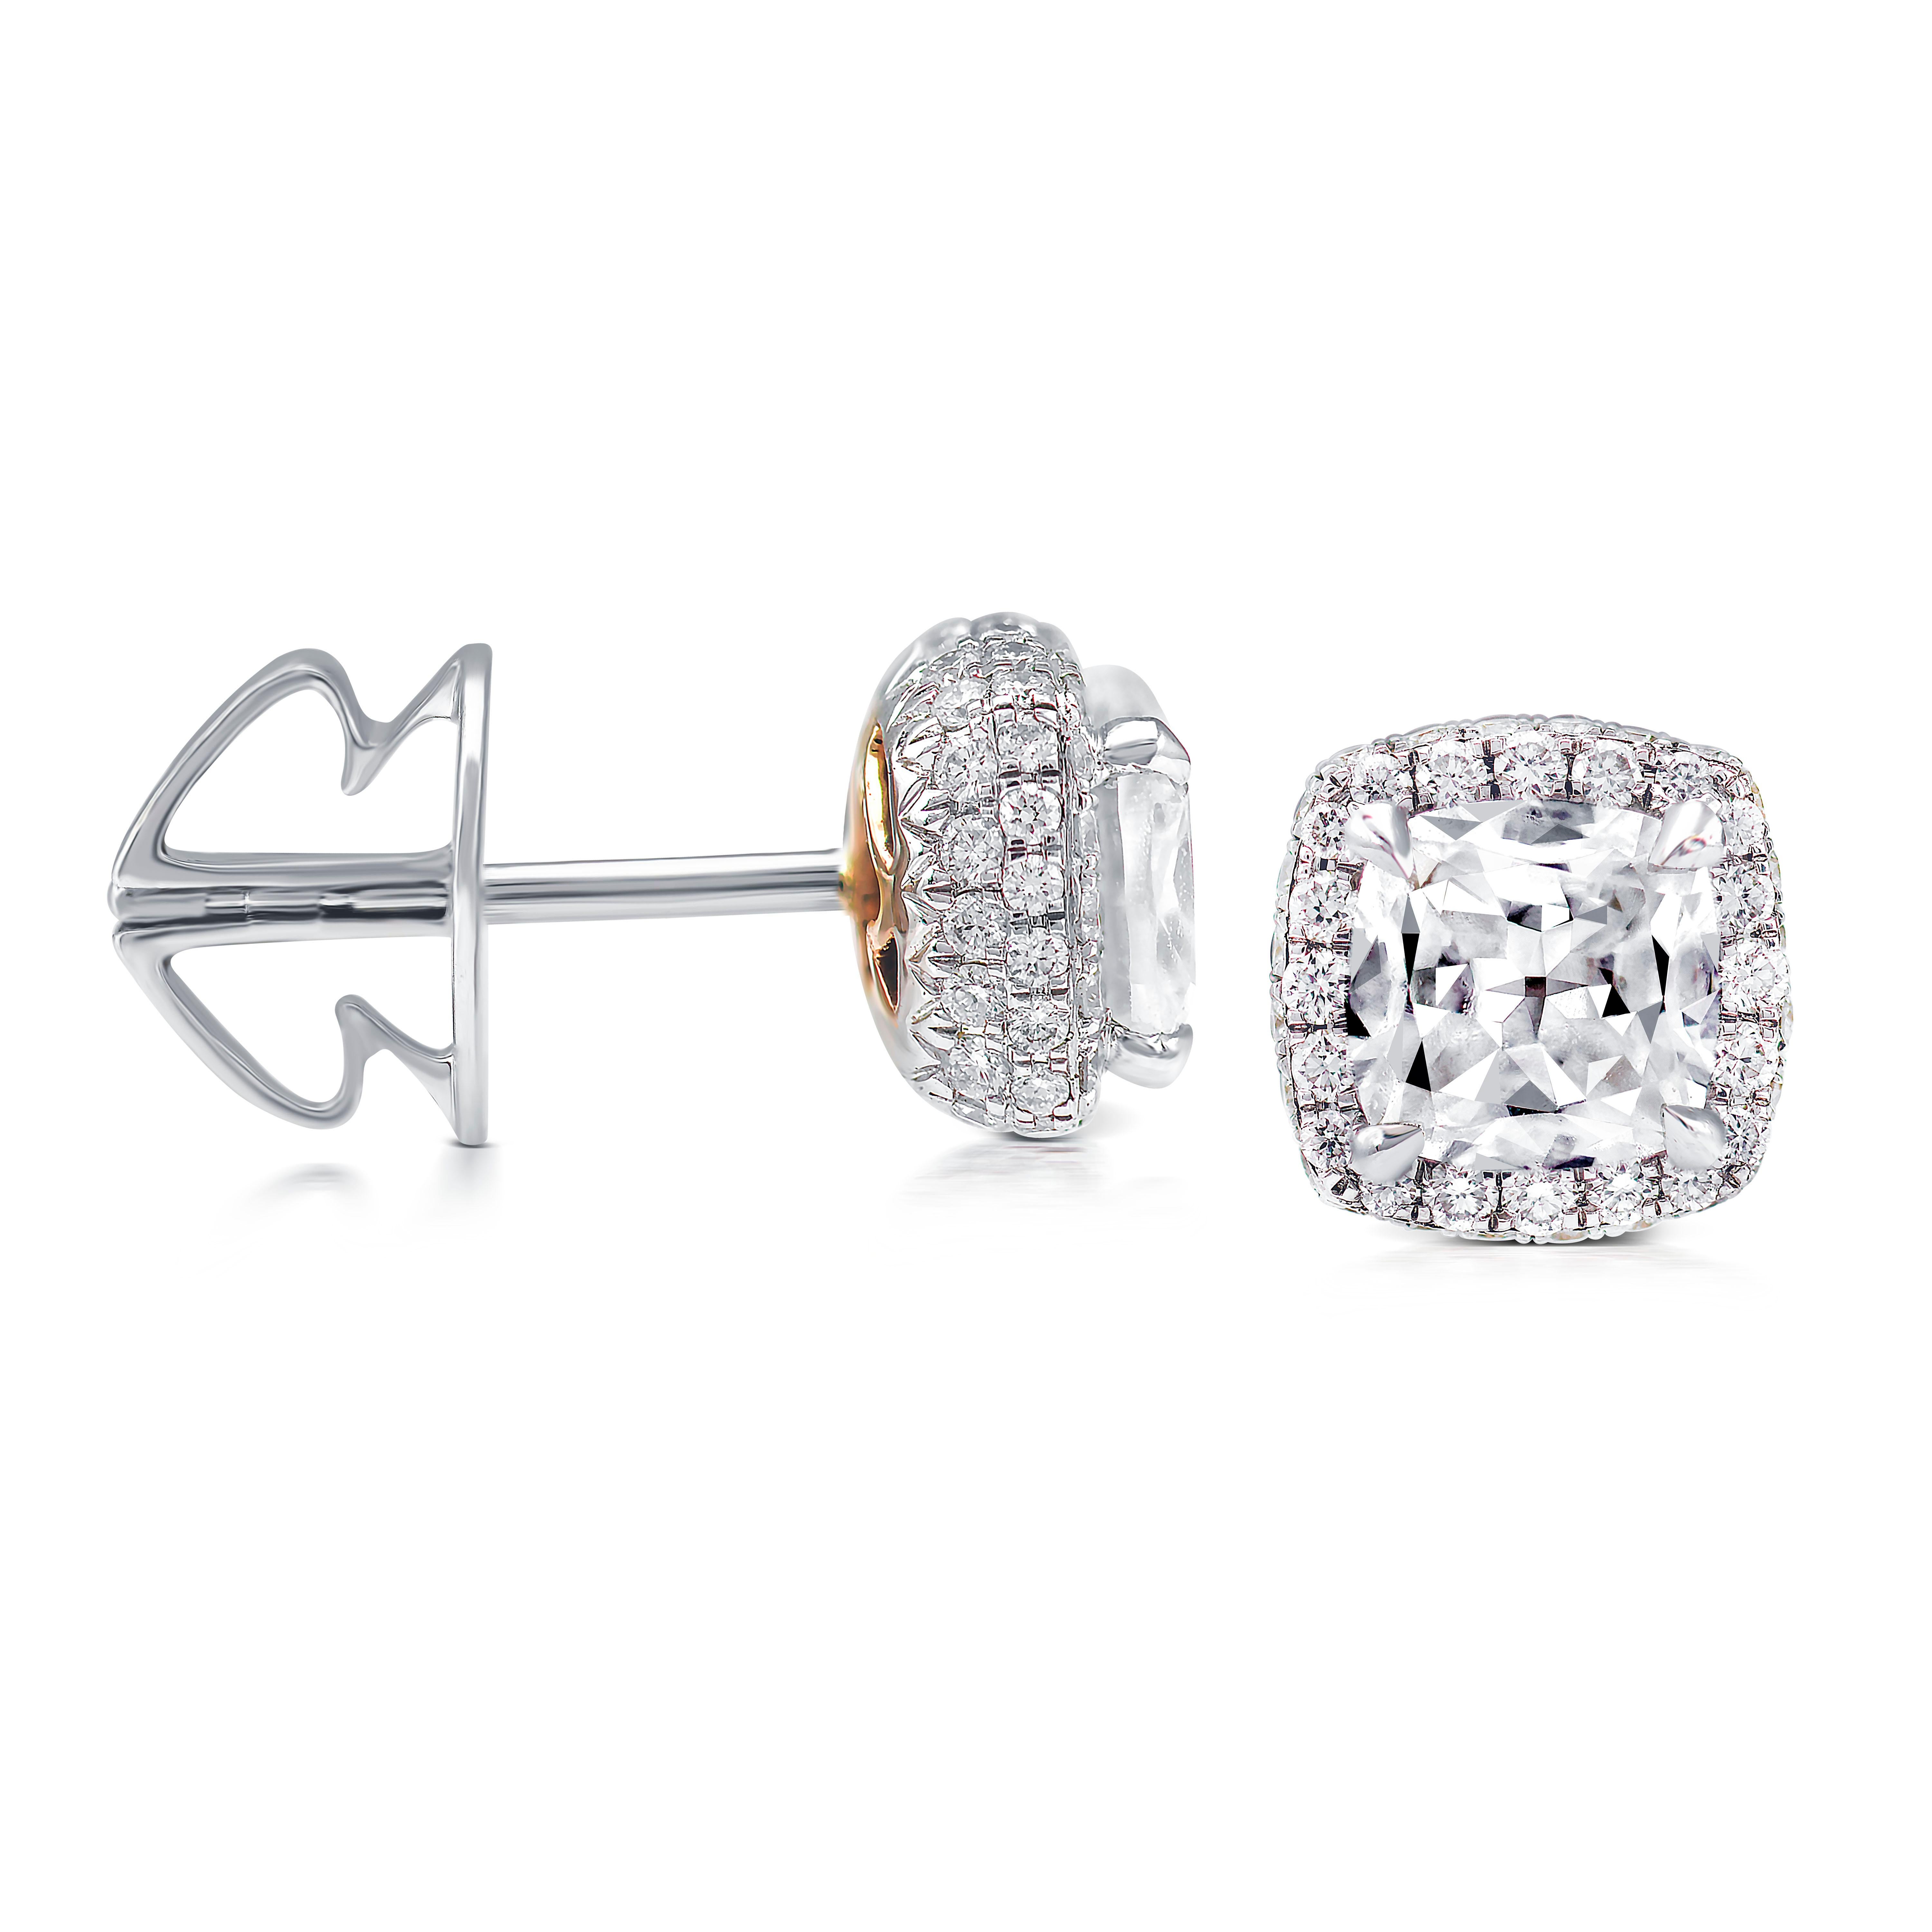 These exquisite Rarever earrings feature a stunning combination of old cut cushiion diamonds and white gold. Each earring showcases a 0.65ct old European brilliant cut diamond with F color and VS clarity, delicately surrounded by a halo of over a